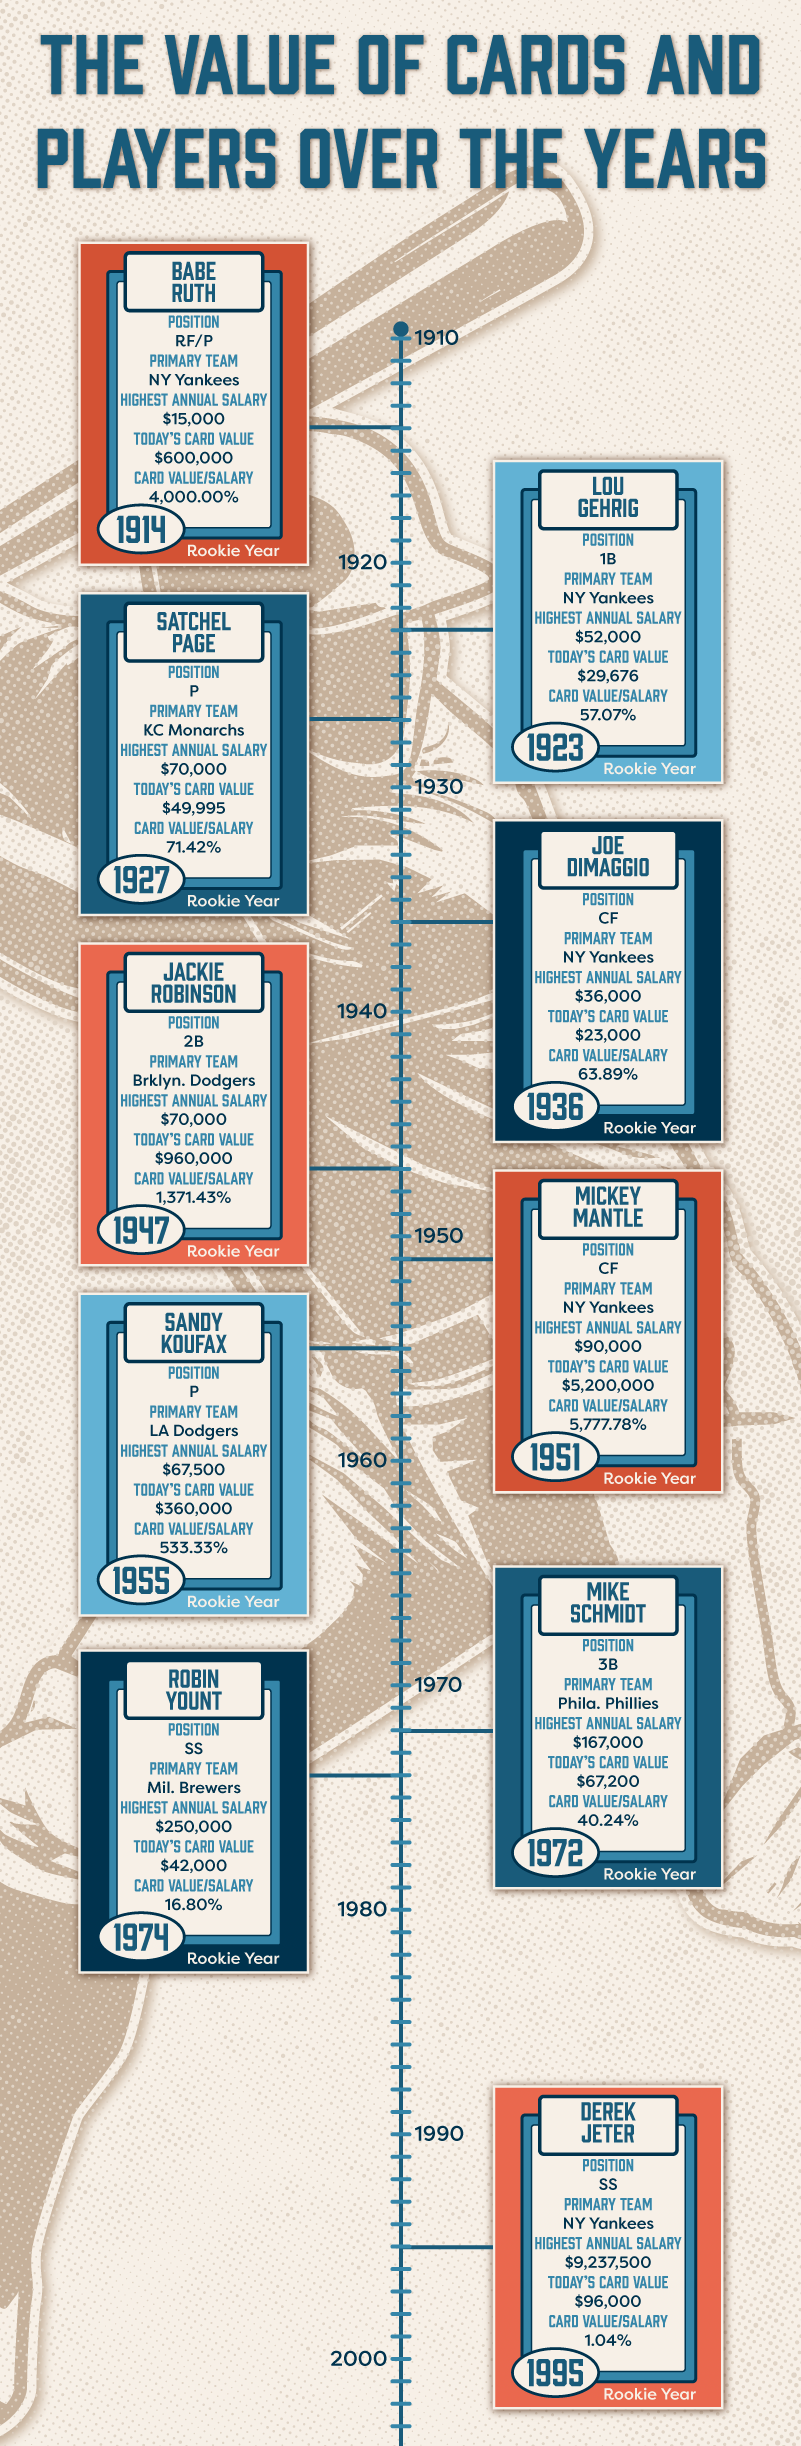 A timeline graphic comparing salary information and baseball card value